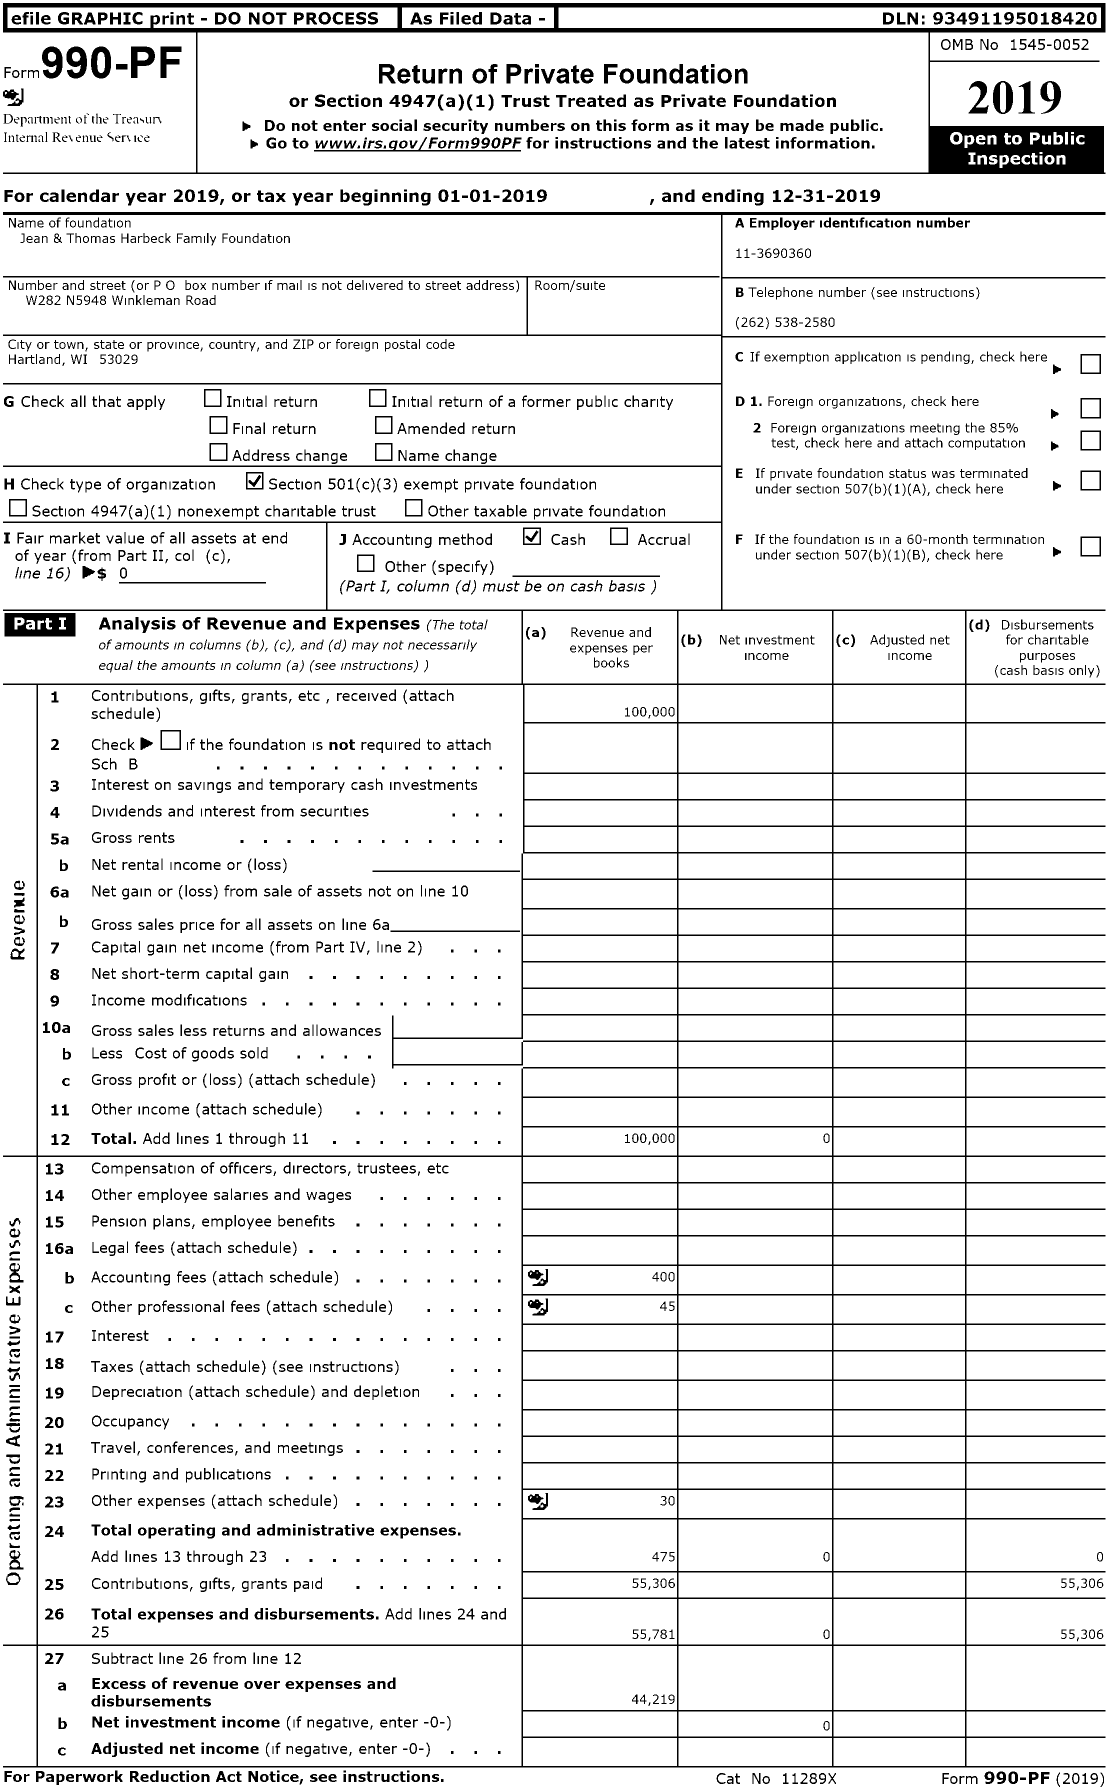 Image of first page of 2019 Form 990PR for Jean and Thomas Harbeck Family Foundation